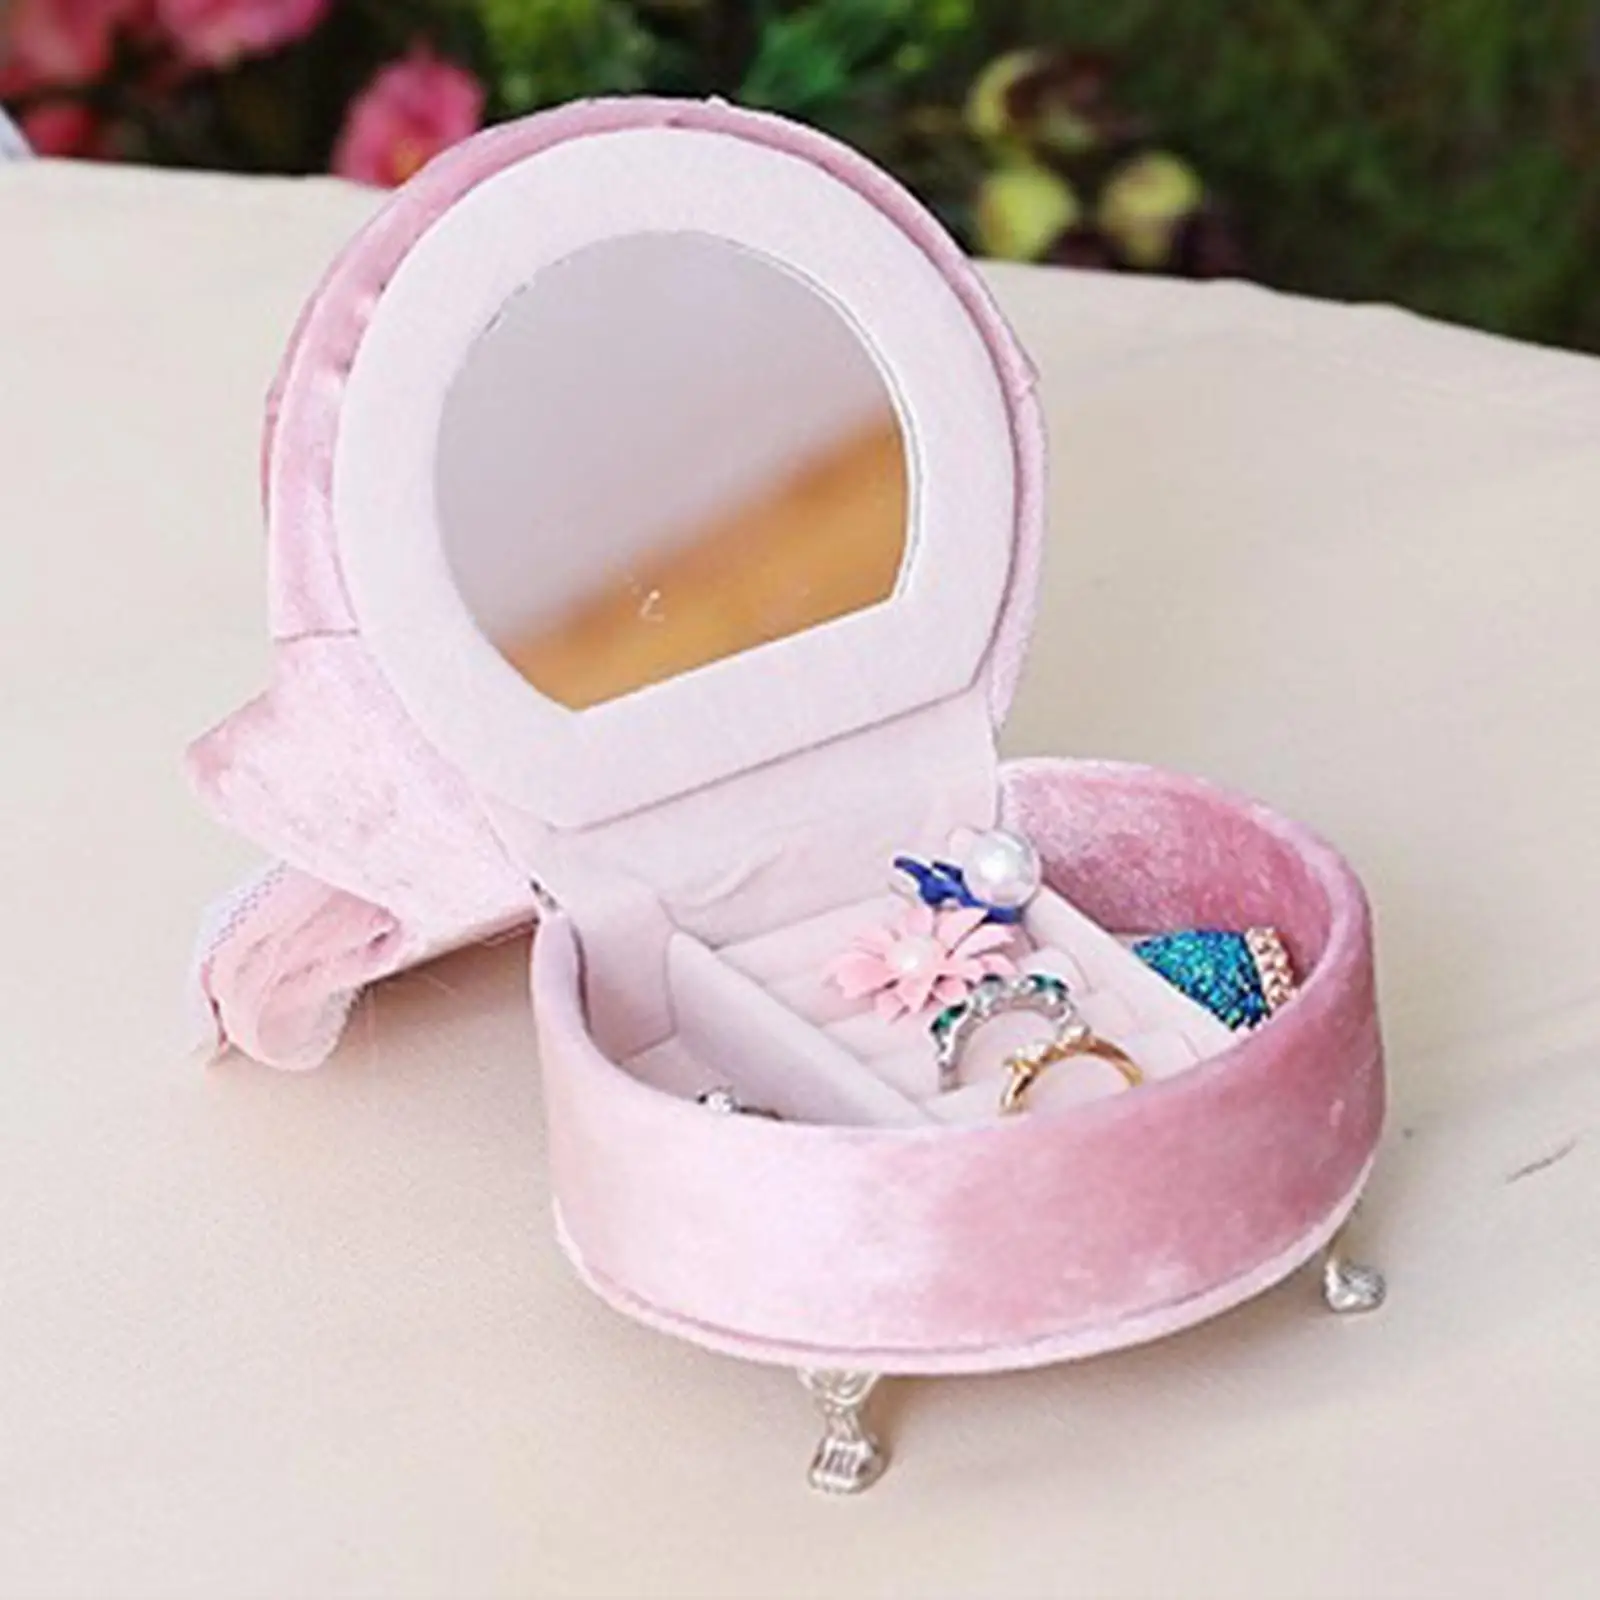 Mini Sofa Jewelry Box Travel Case Rings Earrings Organizer Gift for Women 3.9x3.9x5.5inch Reasonable Partition Creative Portable